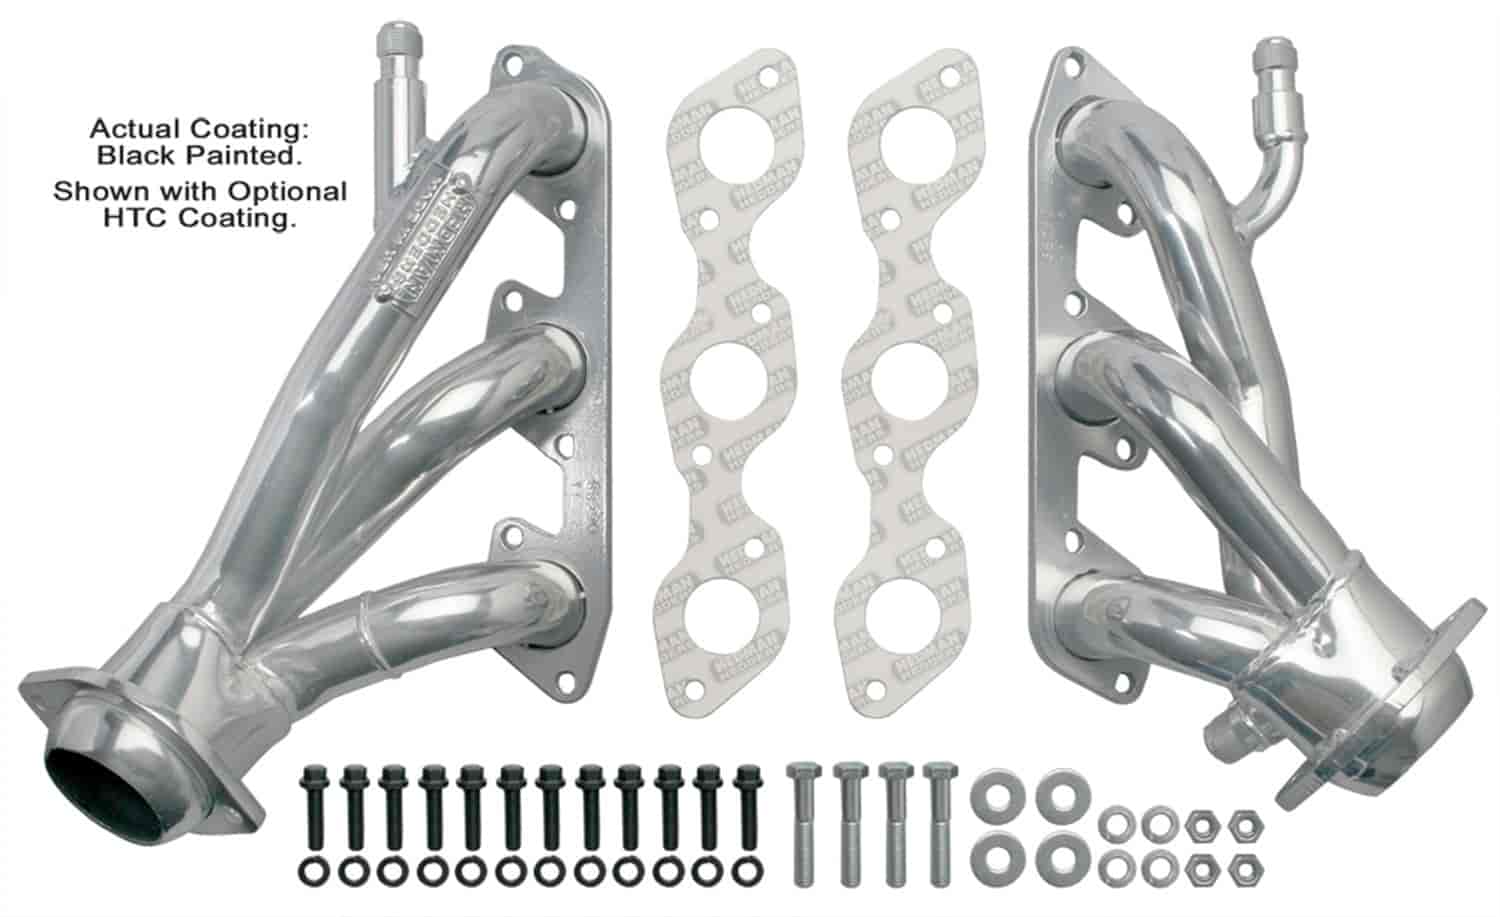 Standard Duty Uncoated Shorty Headers for 1999-2002 Ford Mustang 3.8L